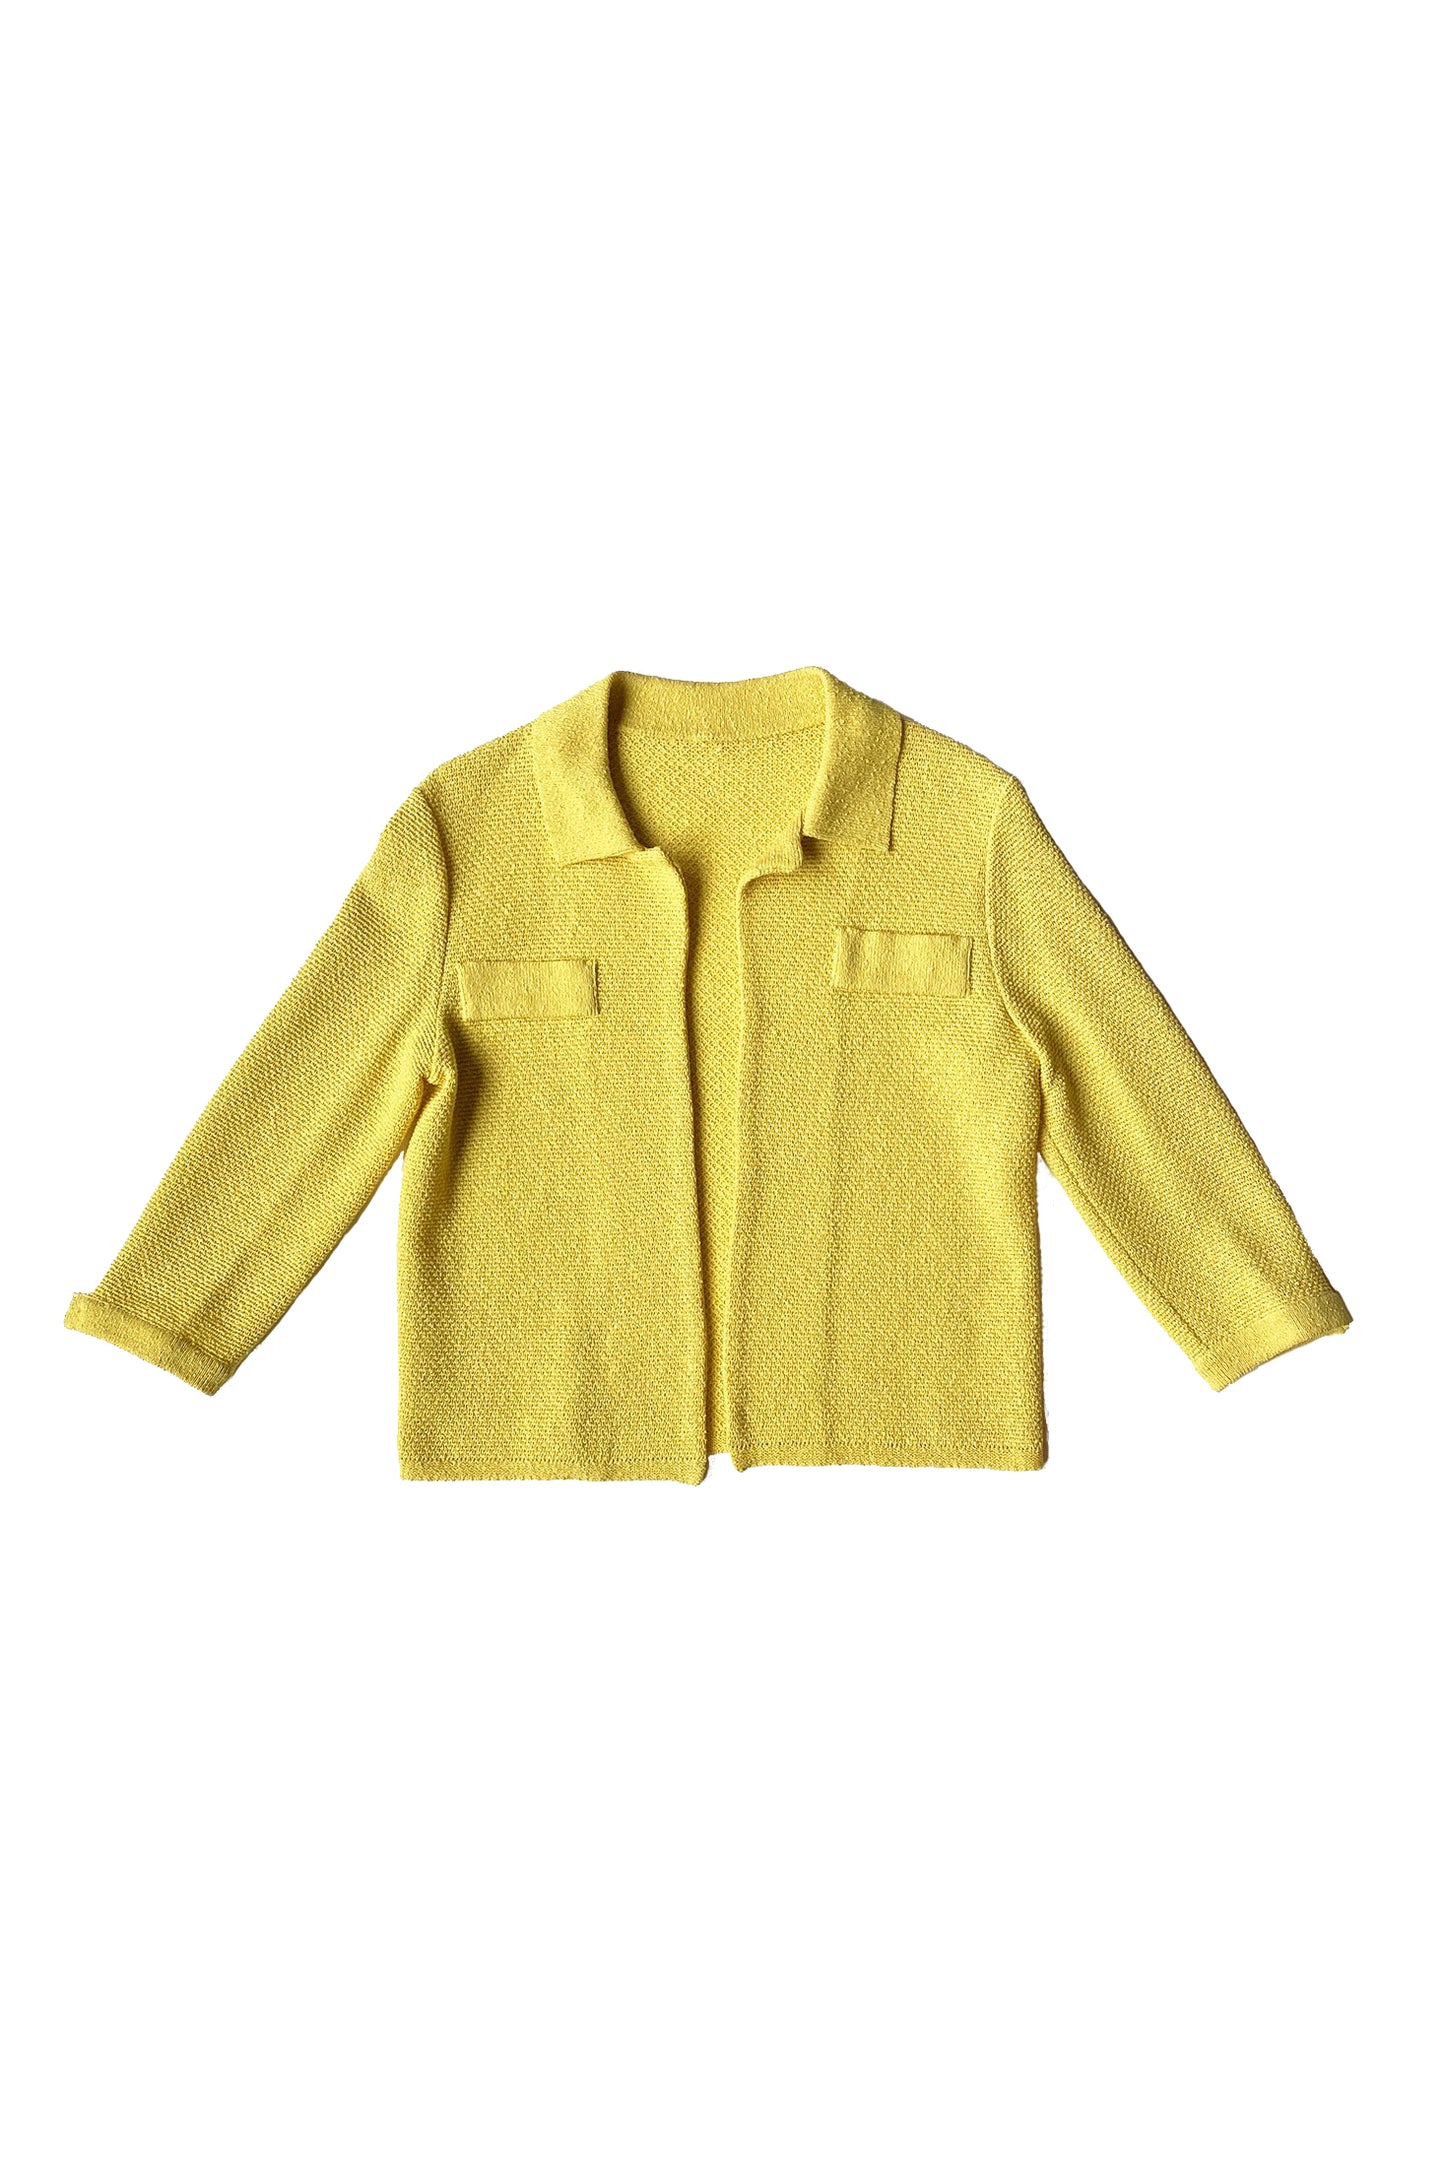 Buttercup yellow Worth knit dress and jacket